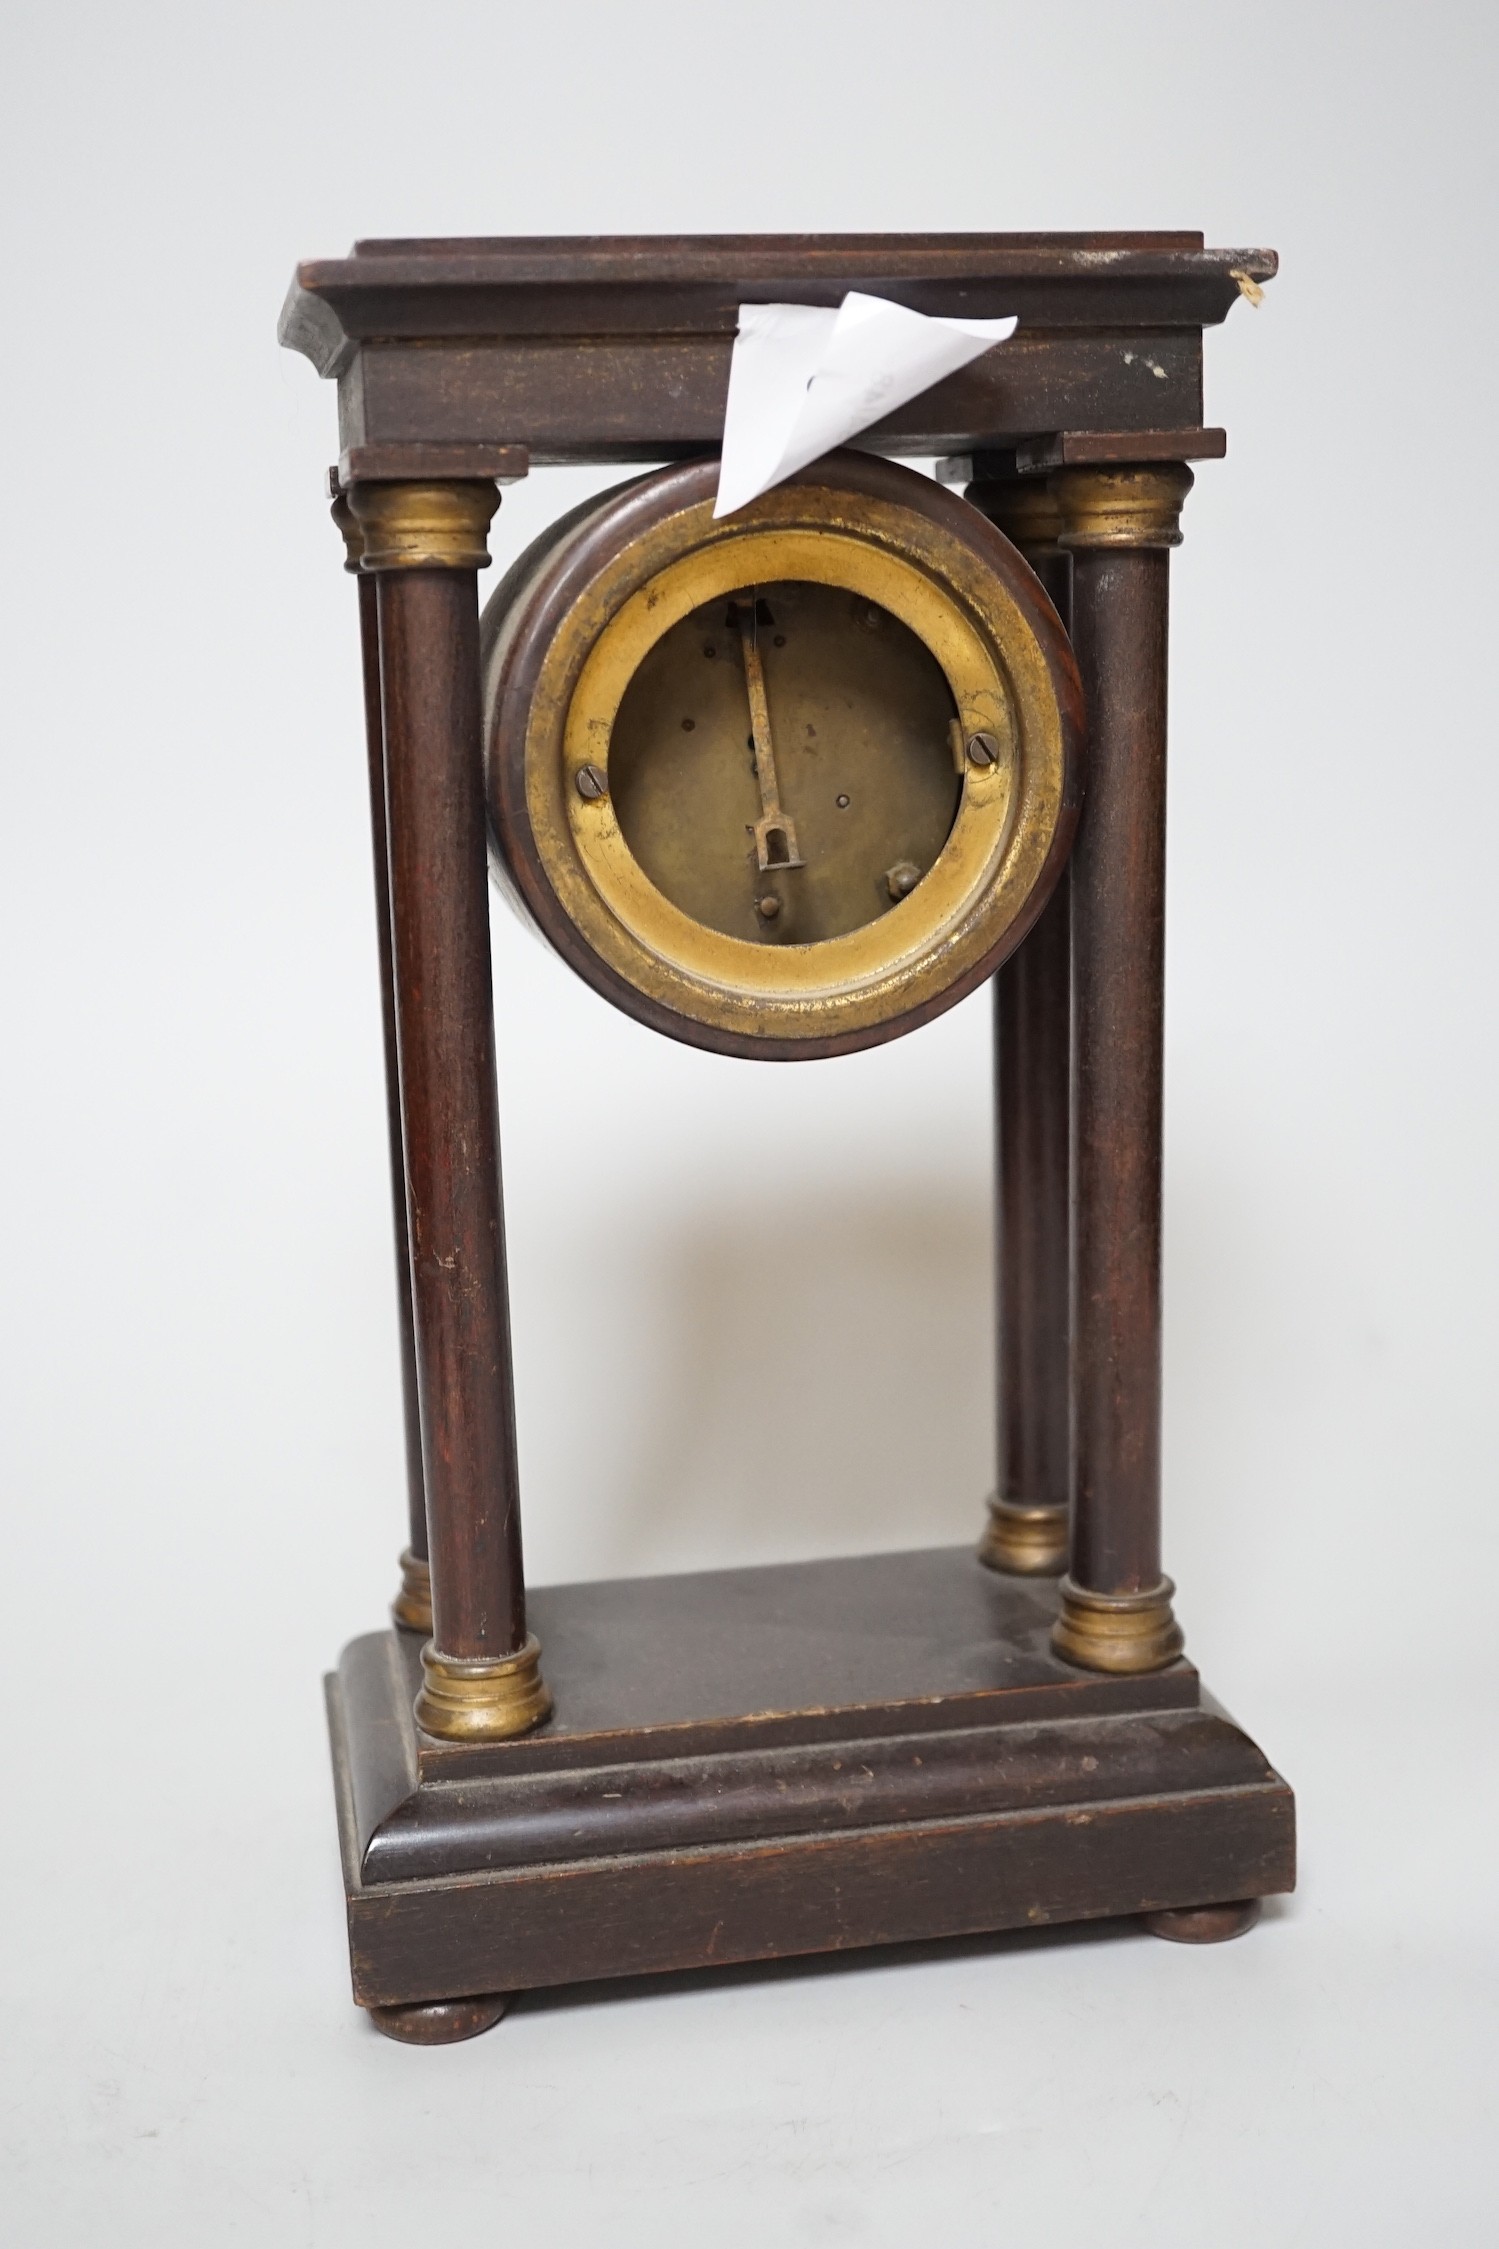 An Edwardian Portico-type mantel clock, 27cms high - Image 4 of 5